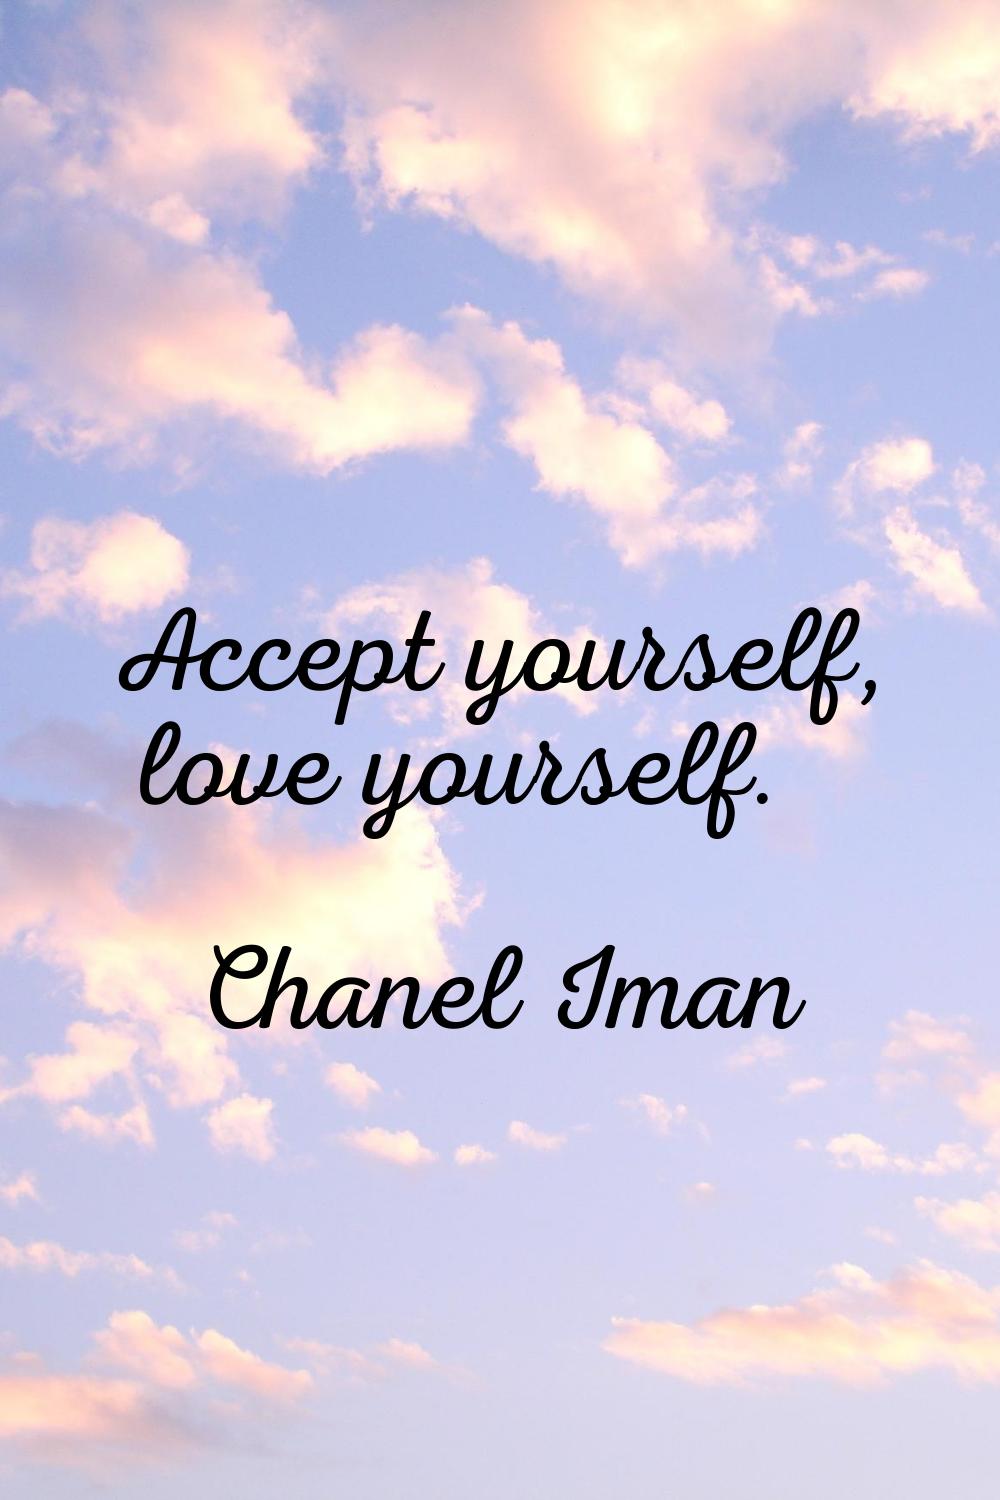 Accept yourself, love yourself.